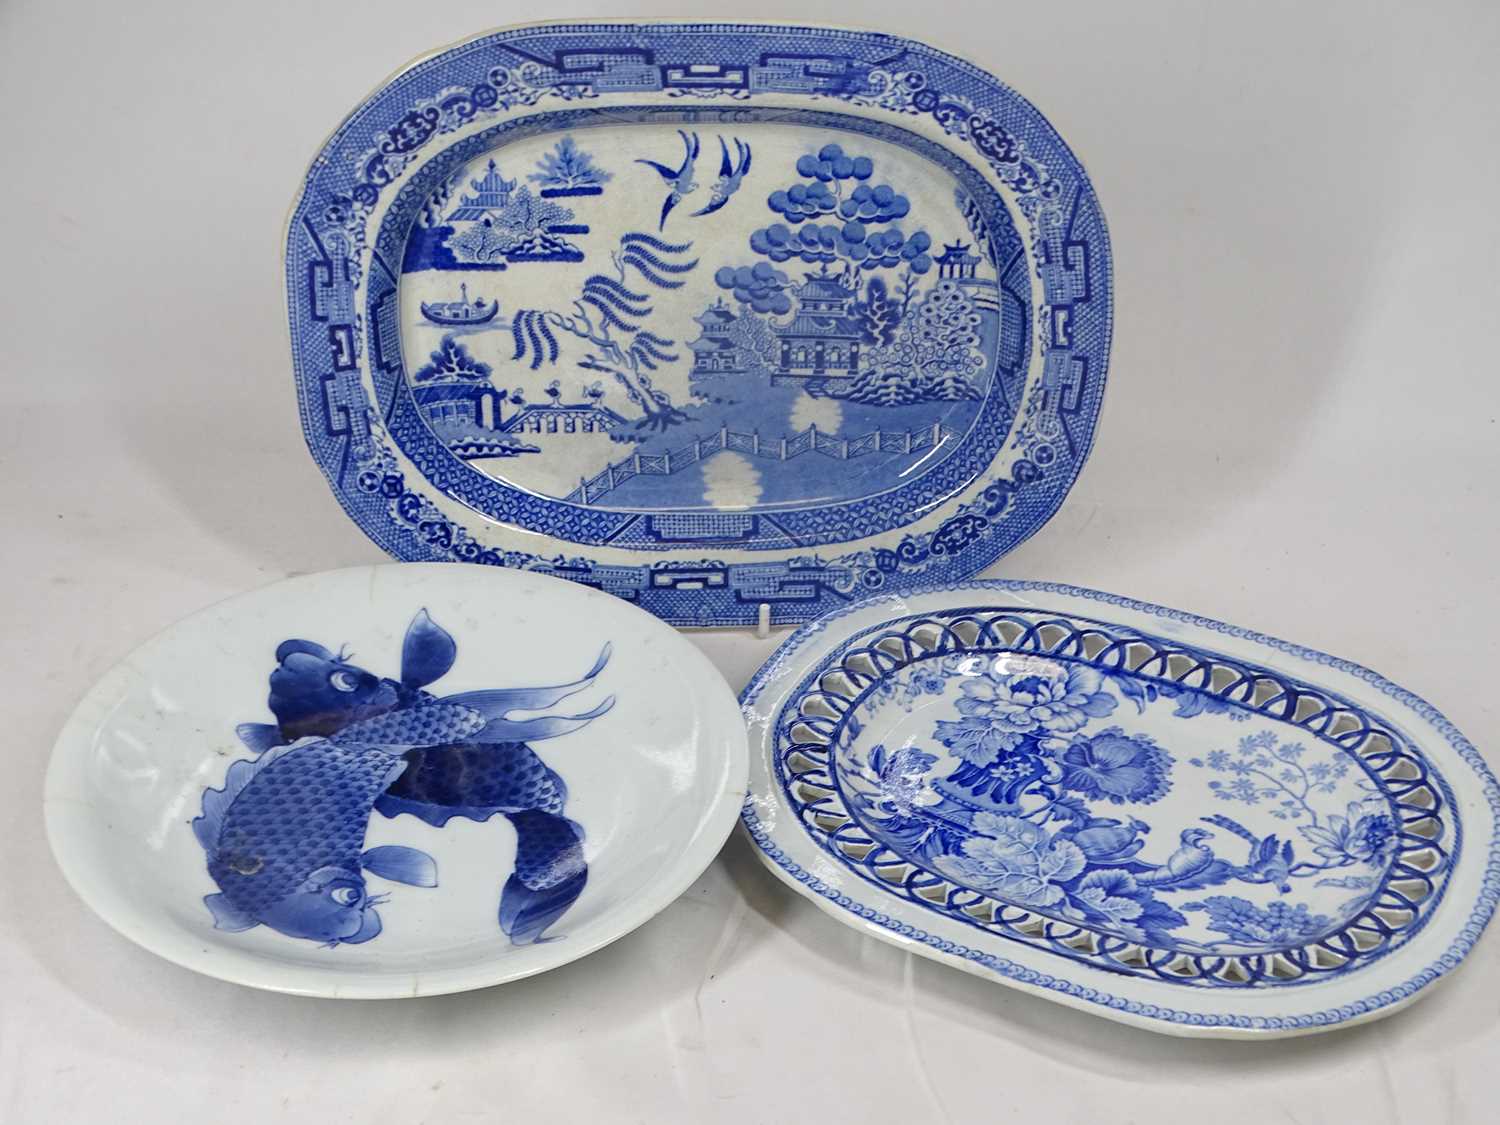 CERAMICS & GLASSWARE - Early 19th Century and later decorative plates etc to including Booths - Image 2 of 5